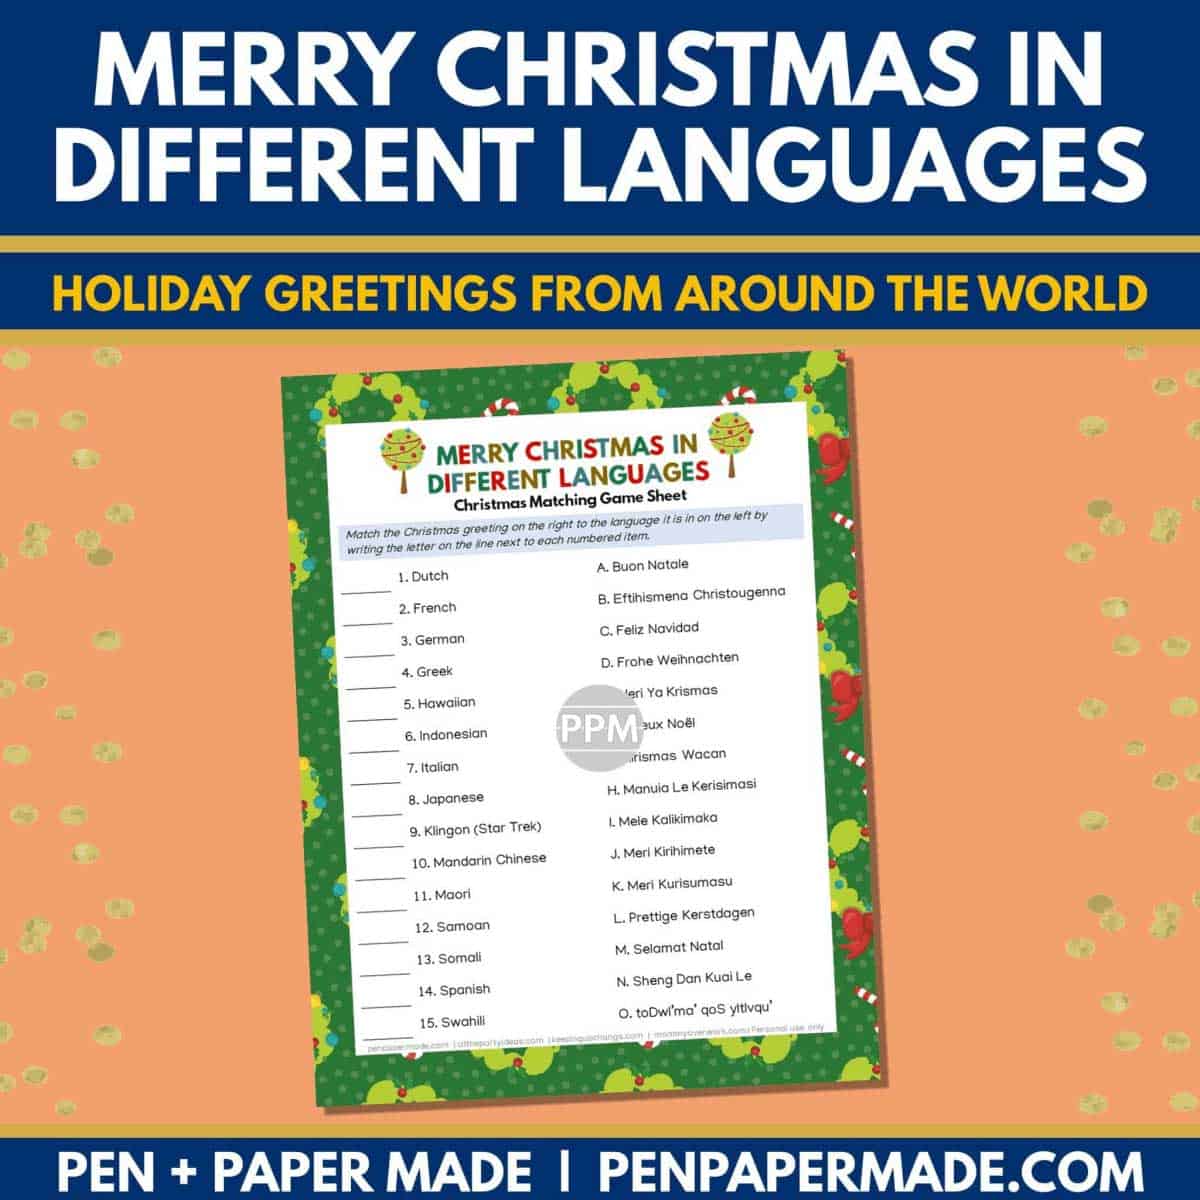 merry christmas in different languages party game printable.